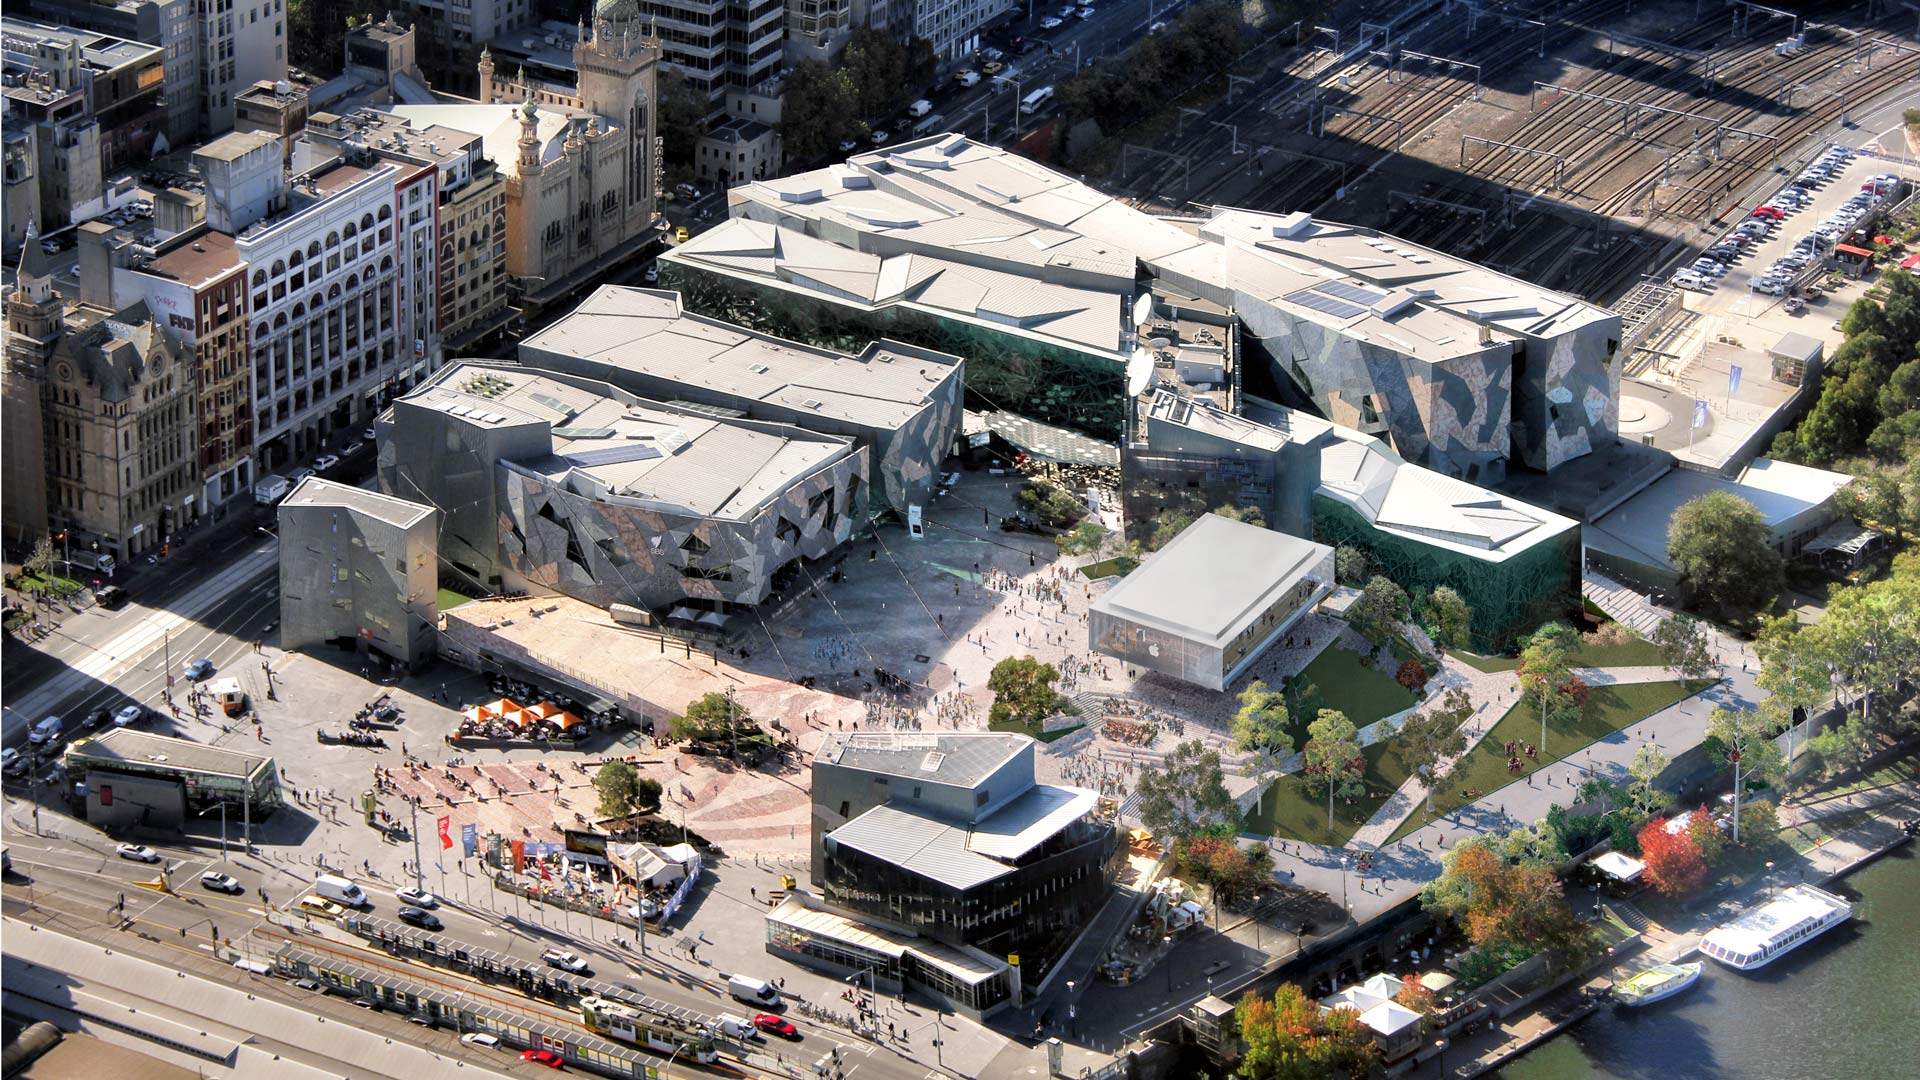 New Designs Have Been Revealed for Apple's Proposed Federation Square Store